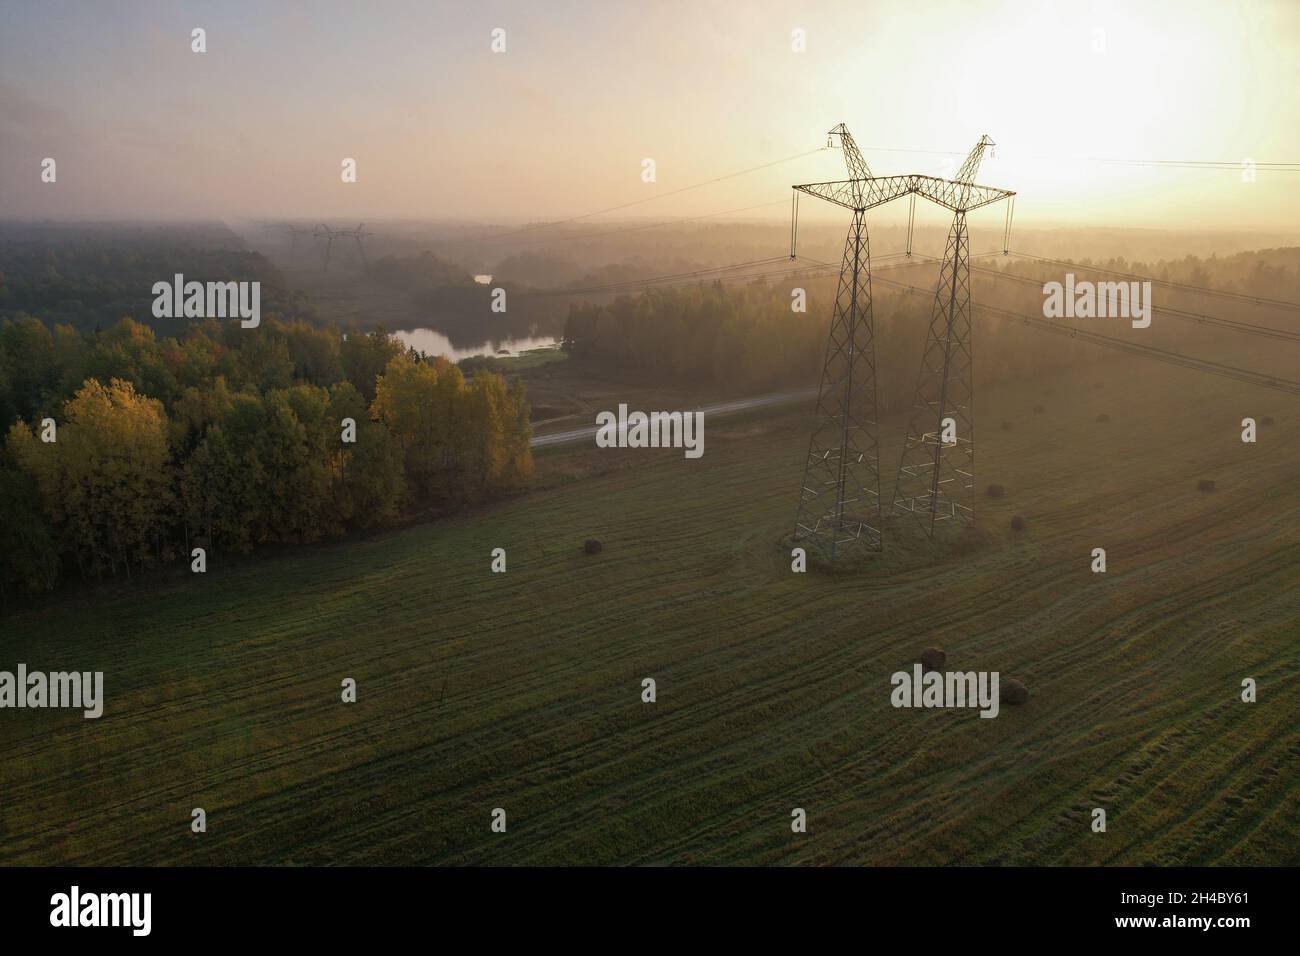 Support of a high-voltage power line in a wooded rural area. Stock Photo